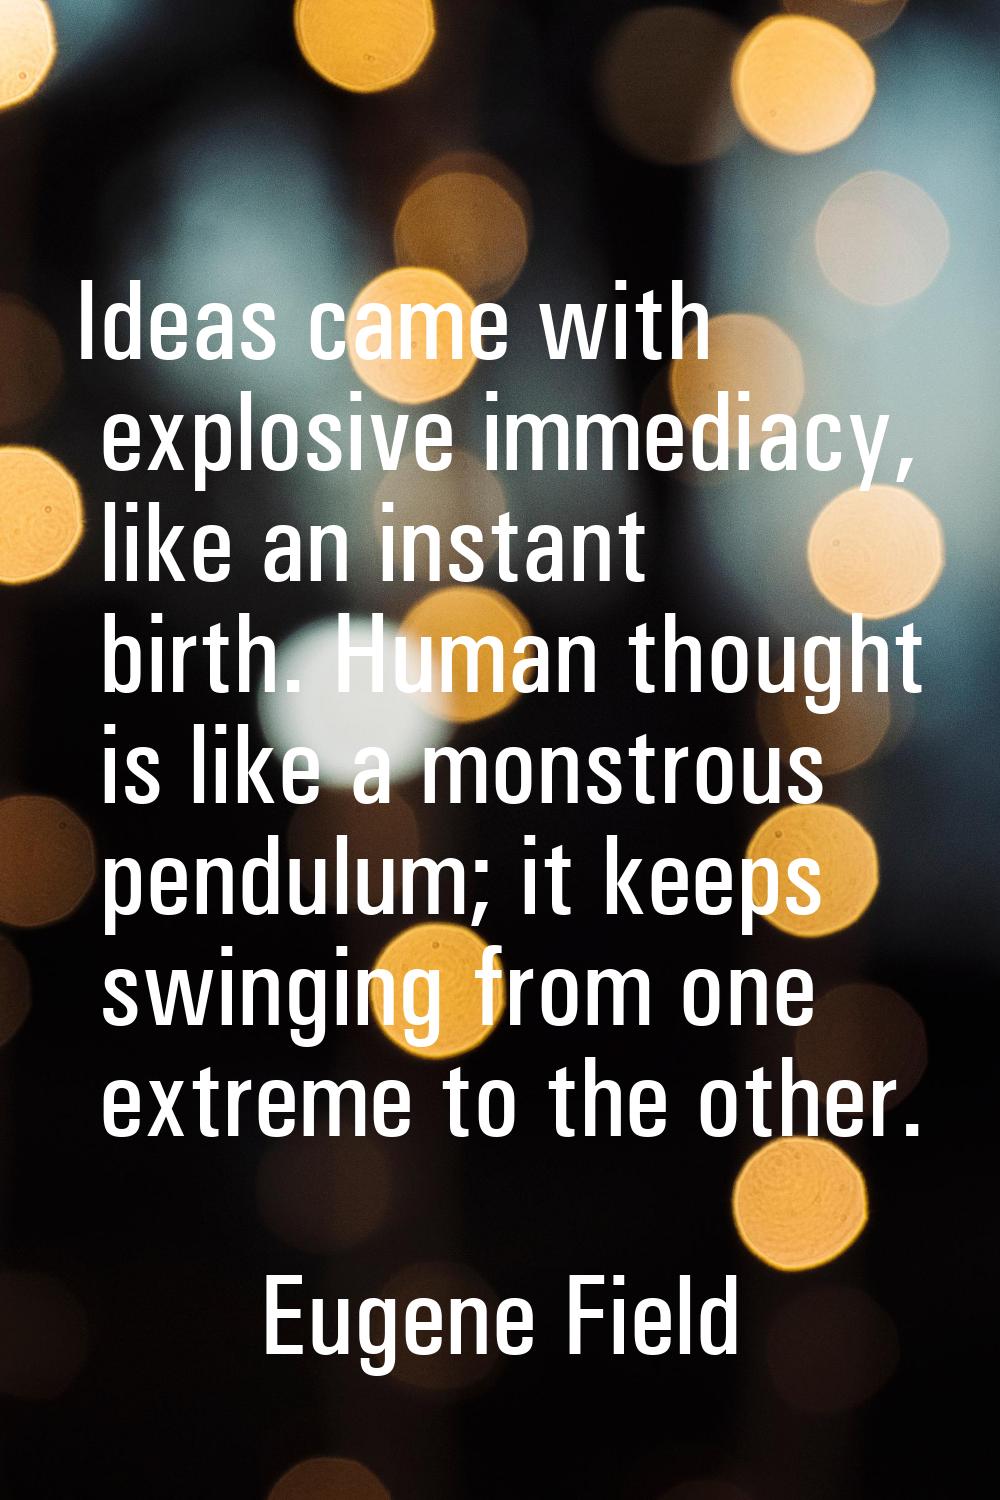 Ideas came with explosive immediacy, like an instant birth. Human thought is like a monstrous pendu